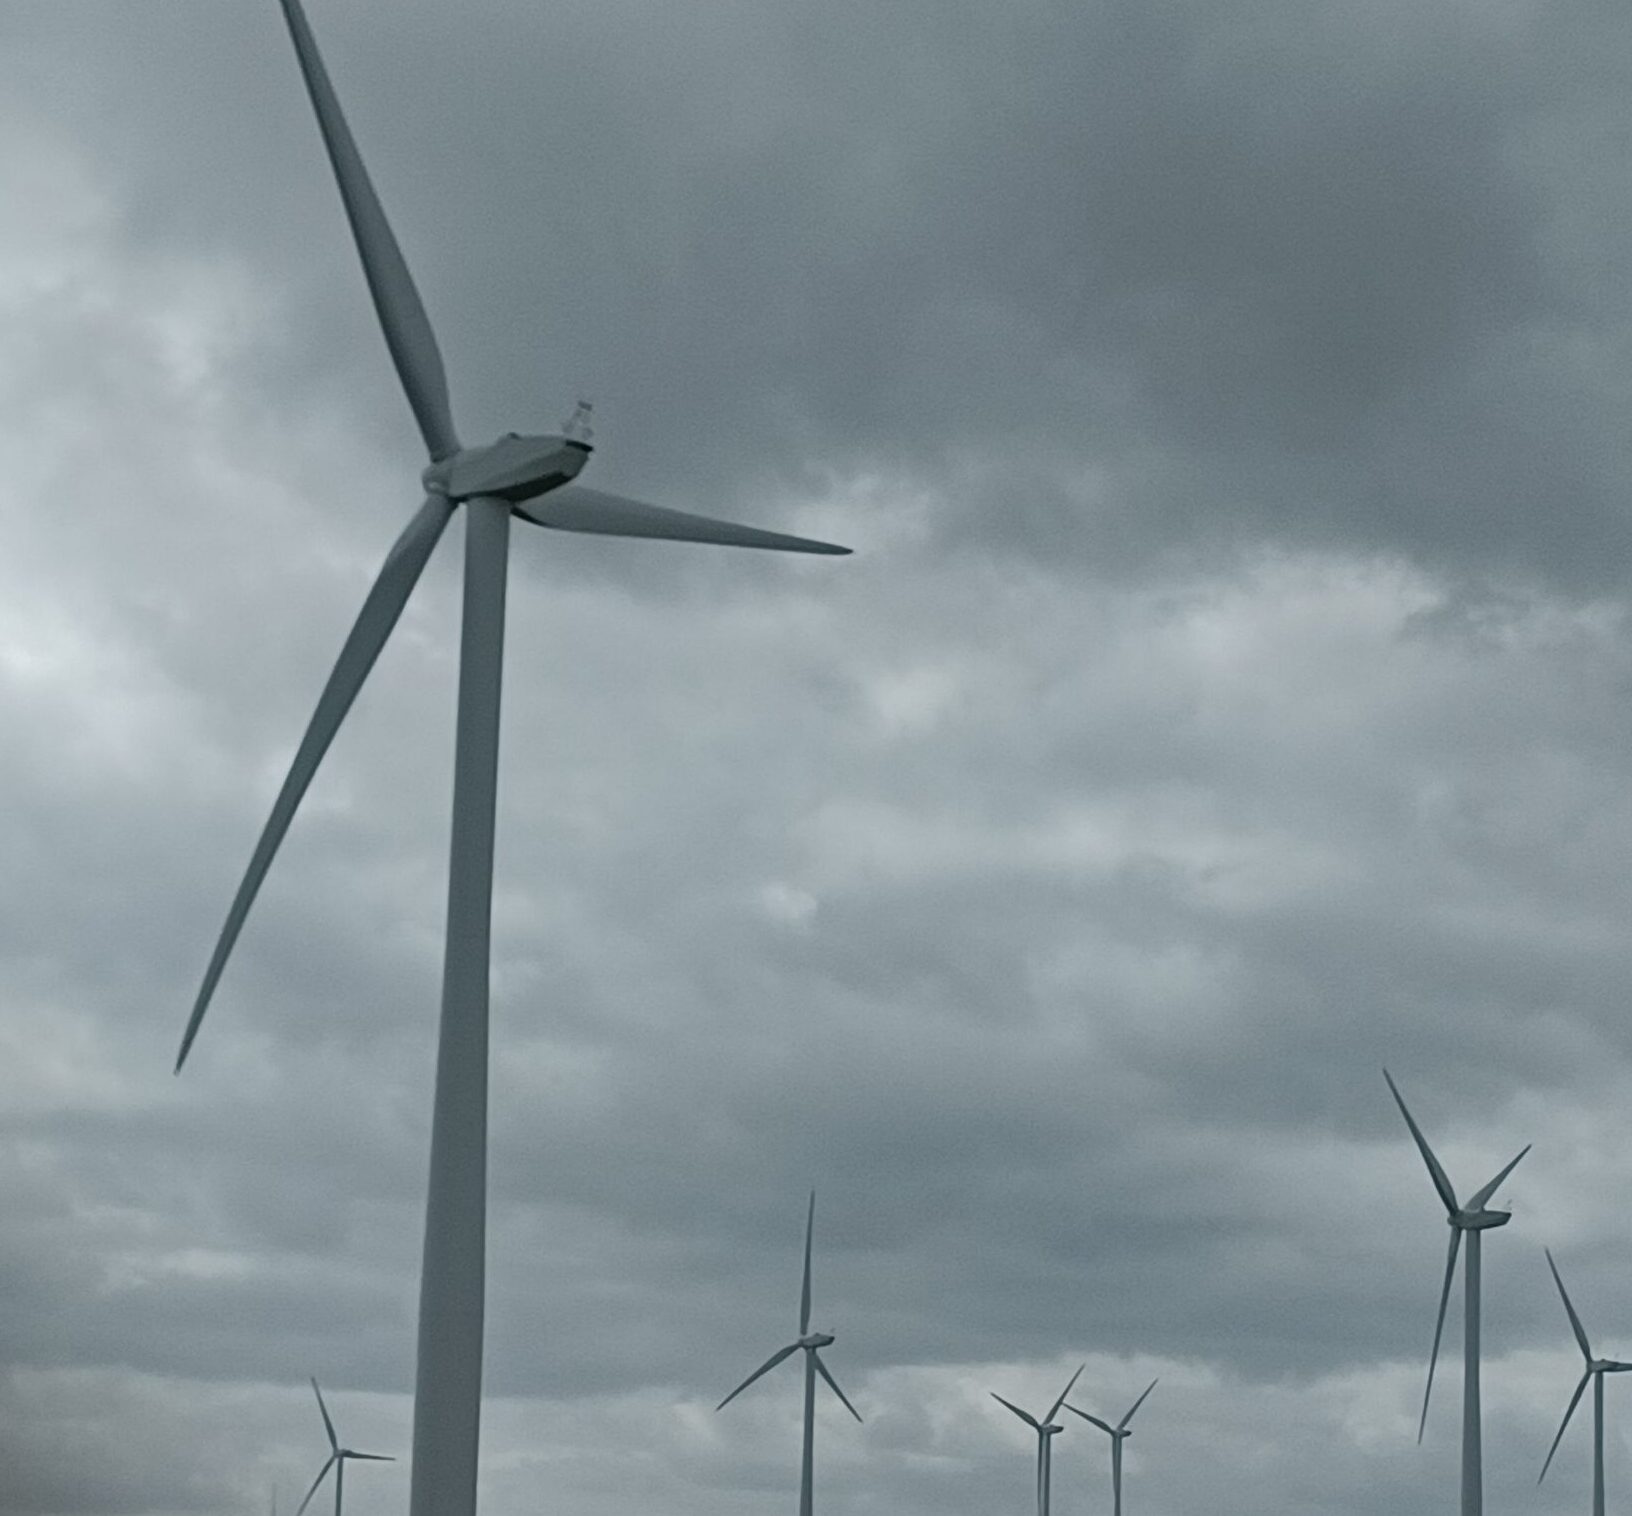 Questions raised over number of wind turbines proposed in Blaenau Gwent